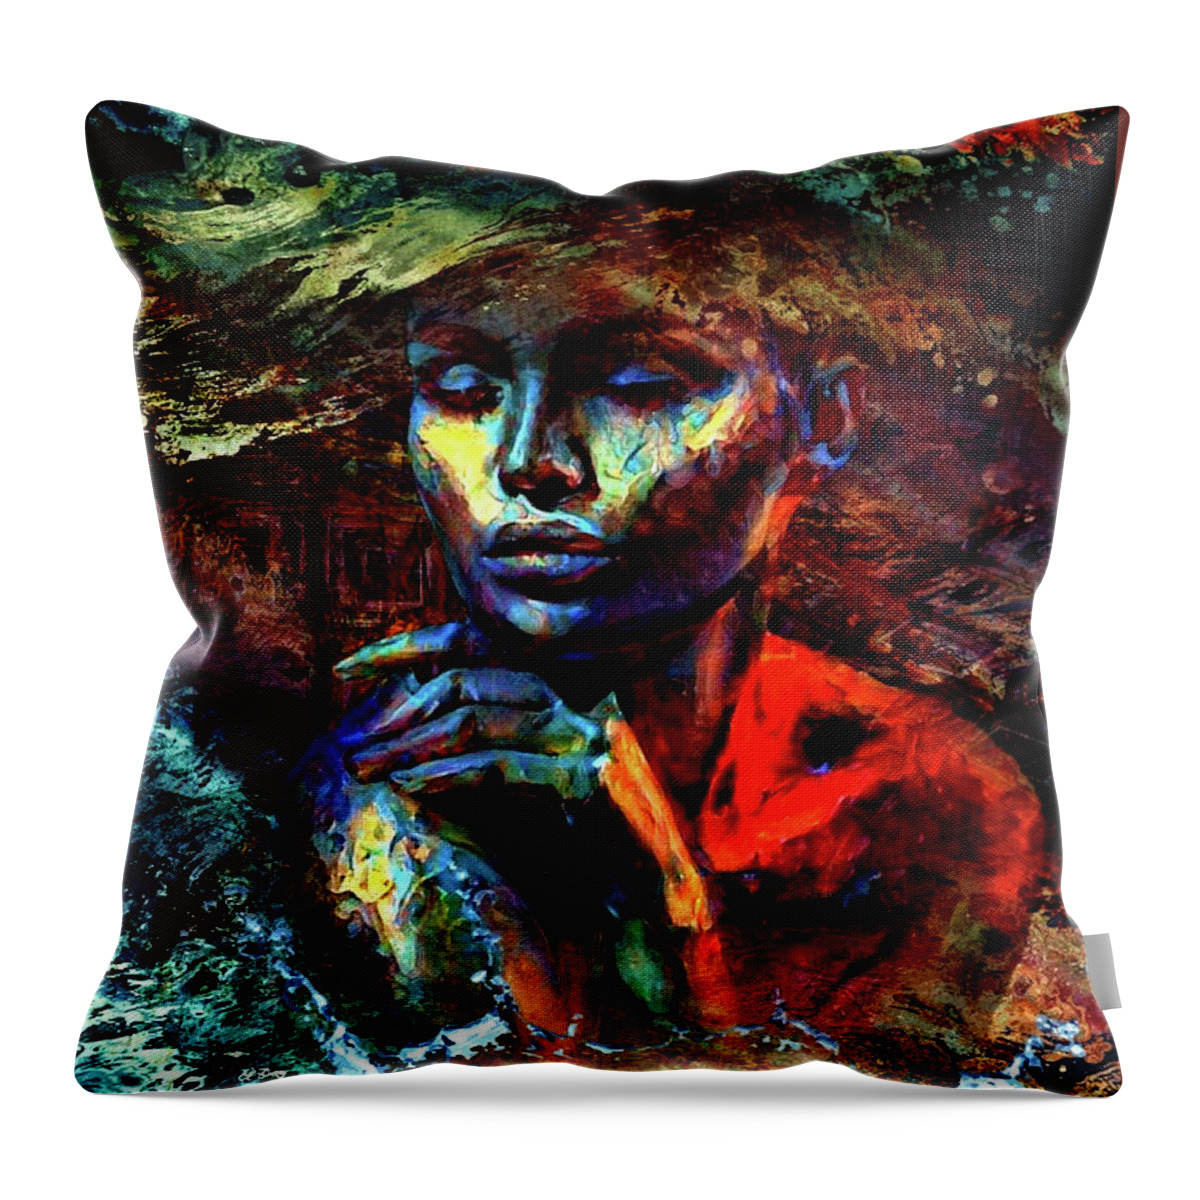 Romance Throw Pillow featuring the mixed media Drowning In Love by Gayle Berry